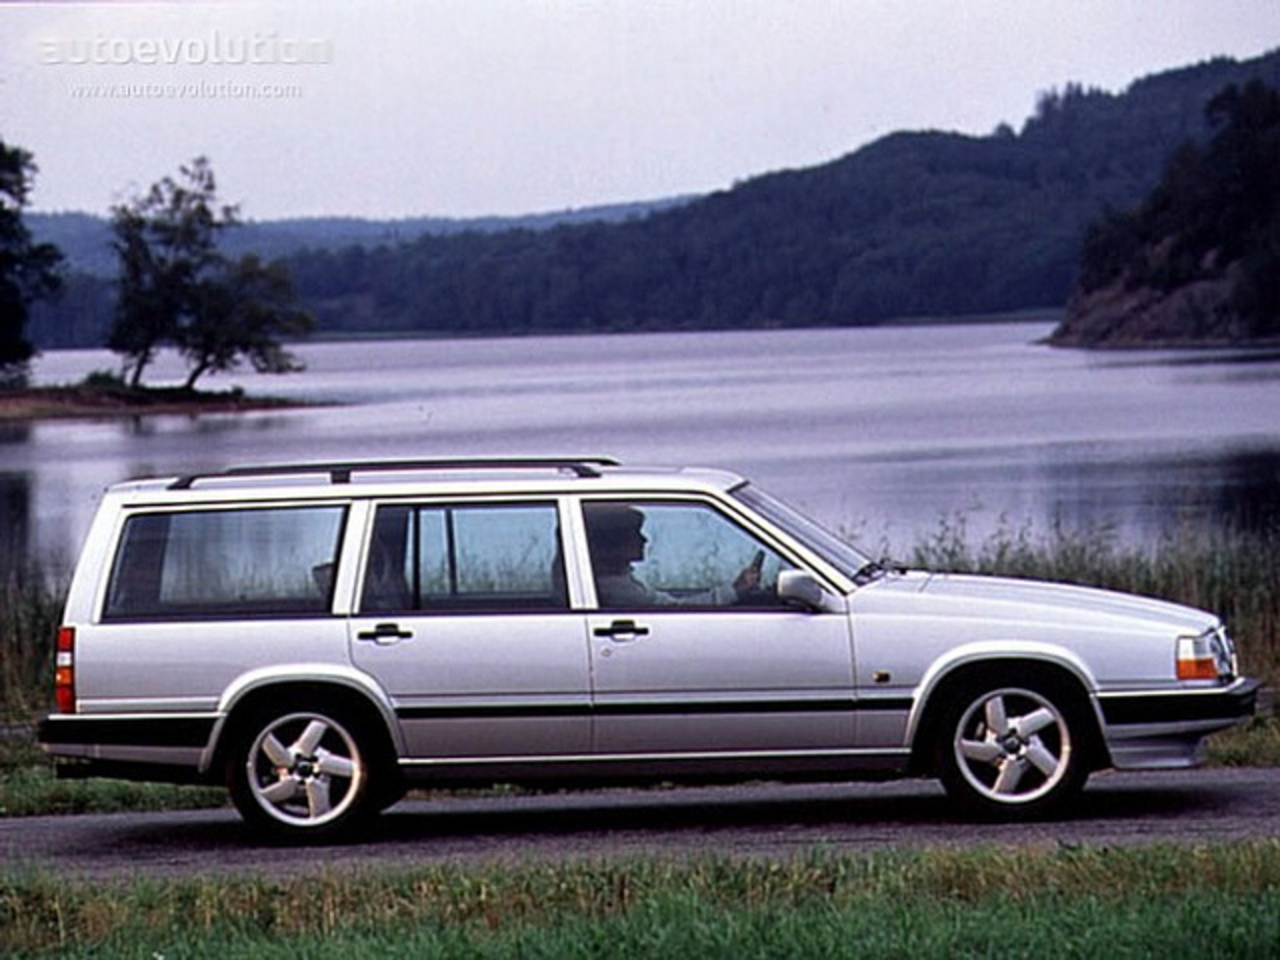 Volvo 945 - reference picture | Flickr - Photo Sharing!